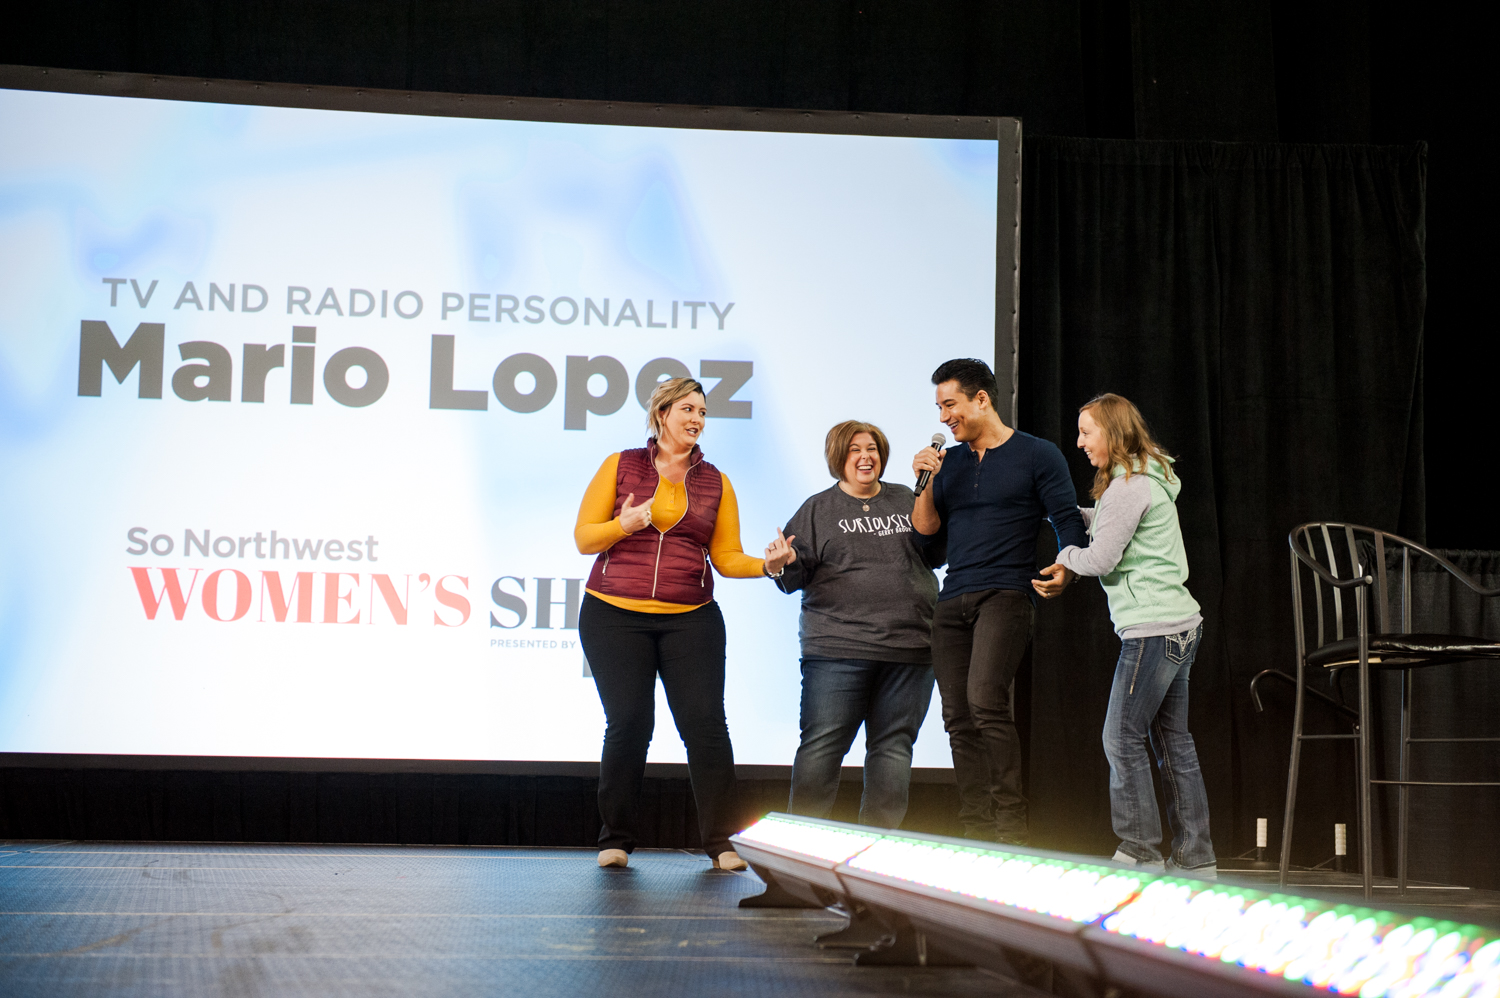 Photos: A.C. Slater (err - Mario Lopez) came to the So NW Women's Show | Seattle Refined1500 x 998